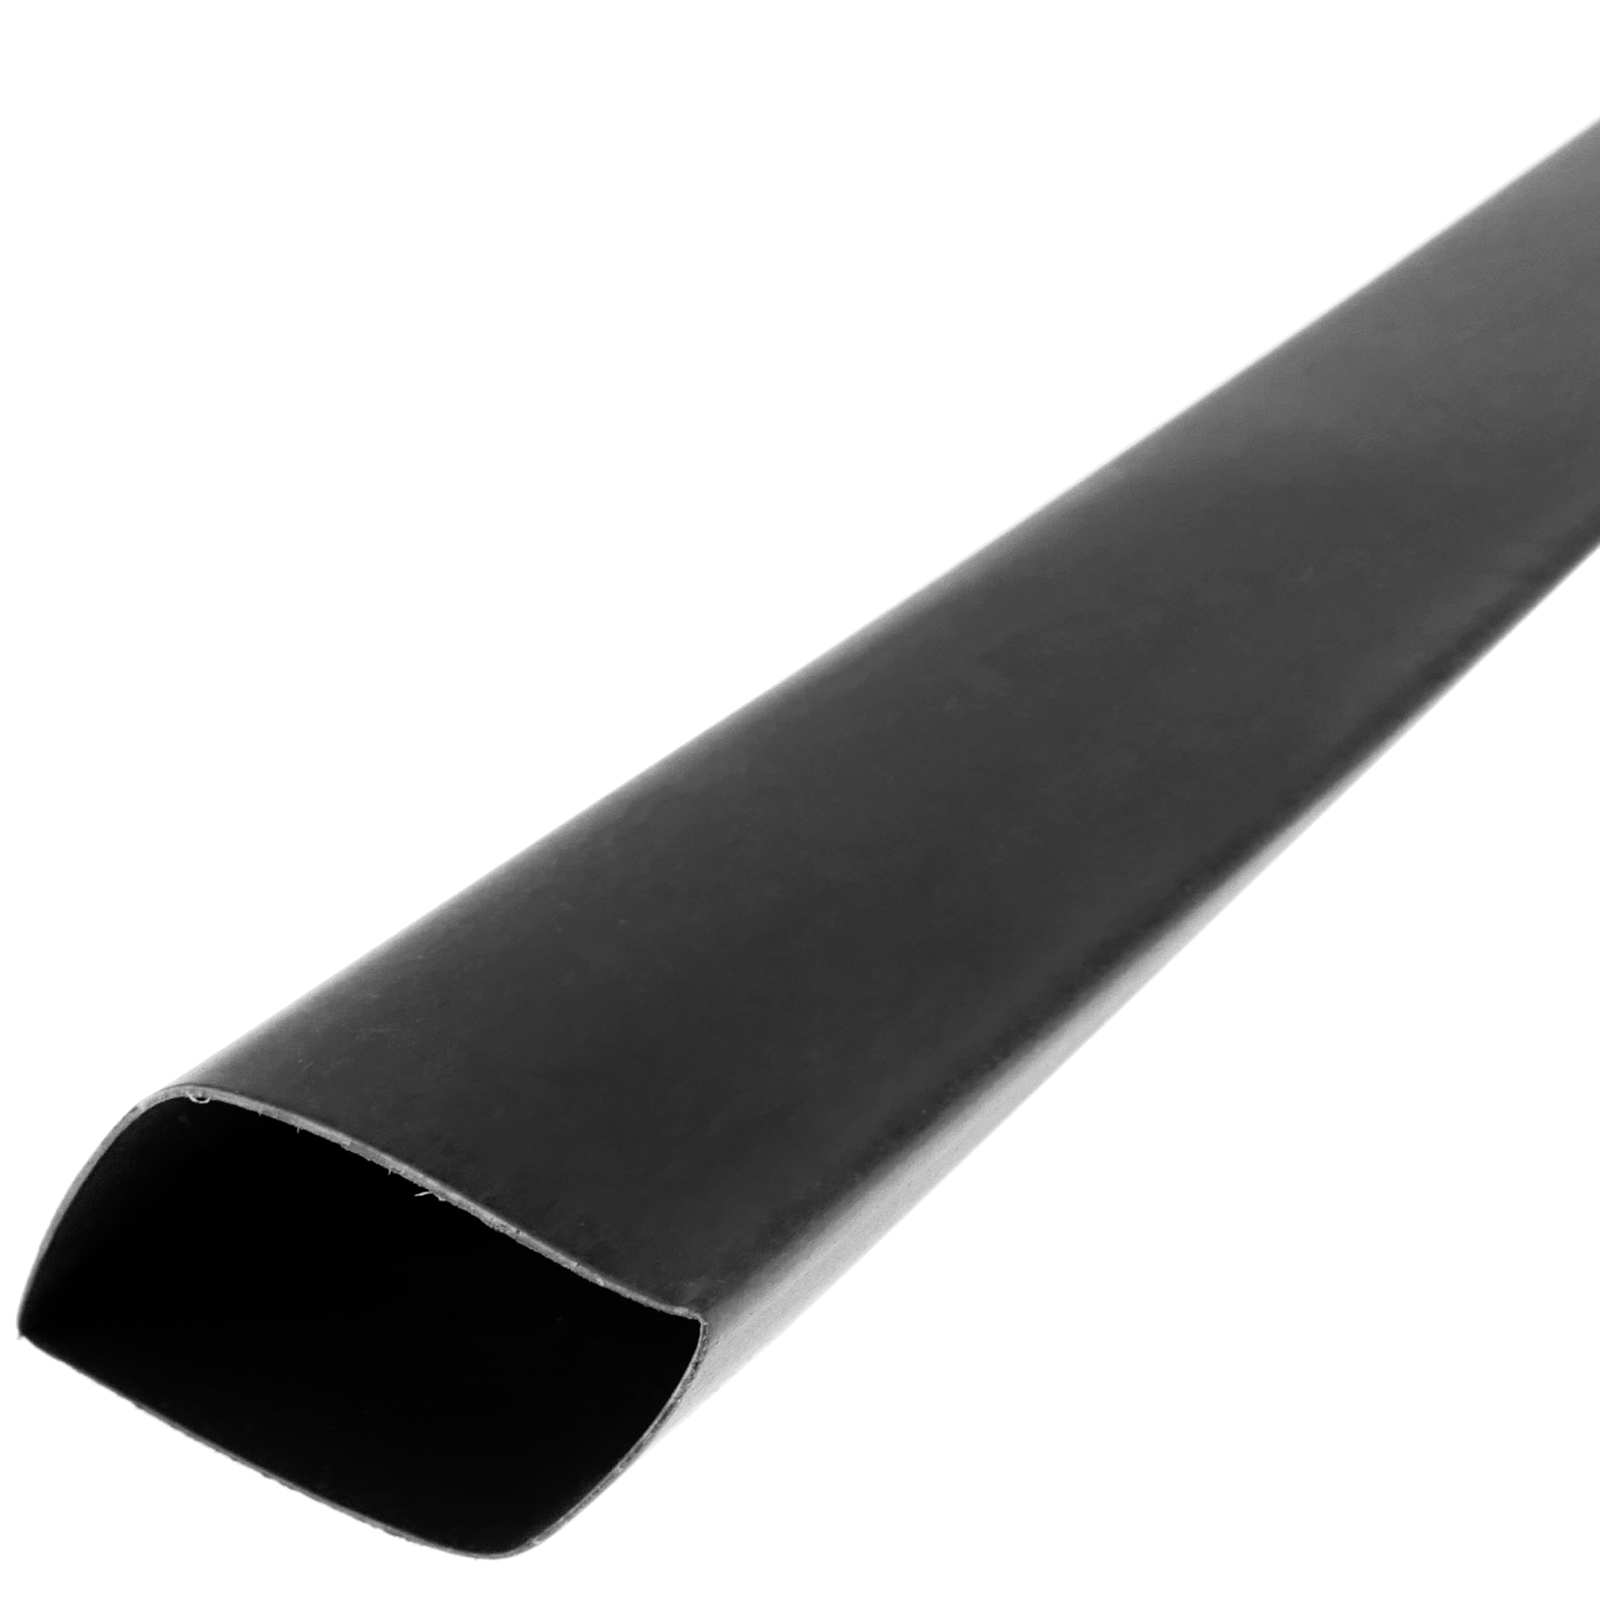 uxcell® Heat Shrink Tube 2:1 Electrical Insulation Tube Wire Cable Tubing Sleeving Wrap Black 14mm Diameter 1m Length 